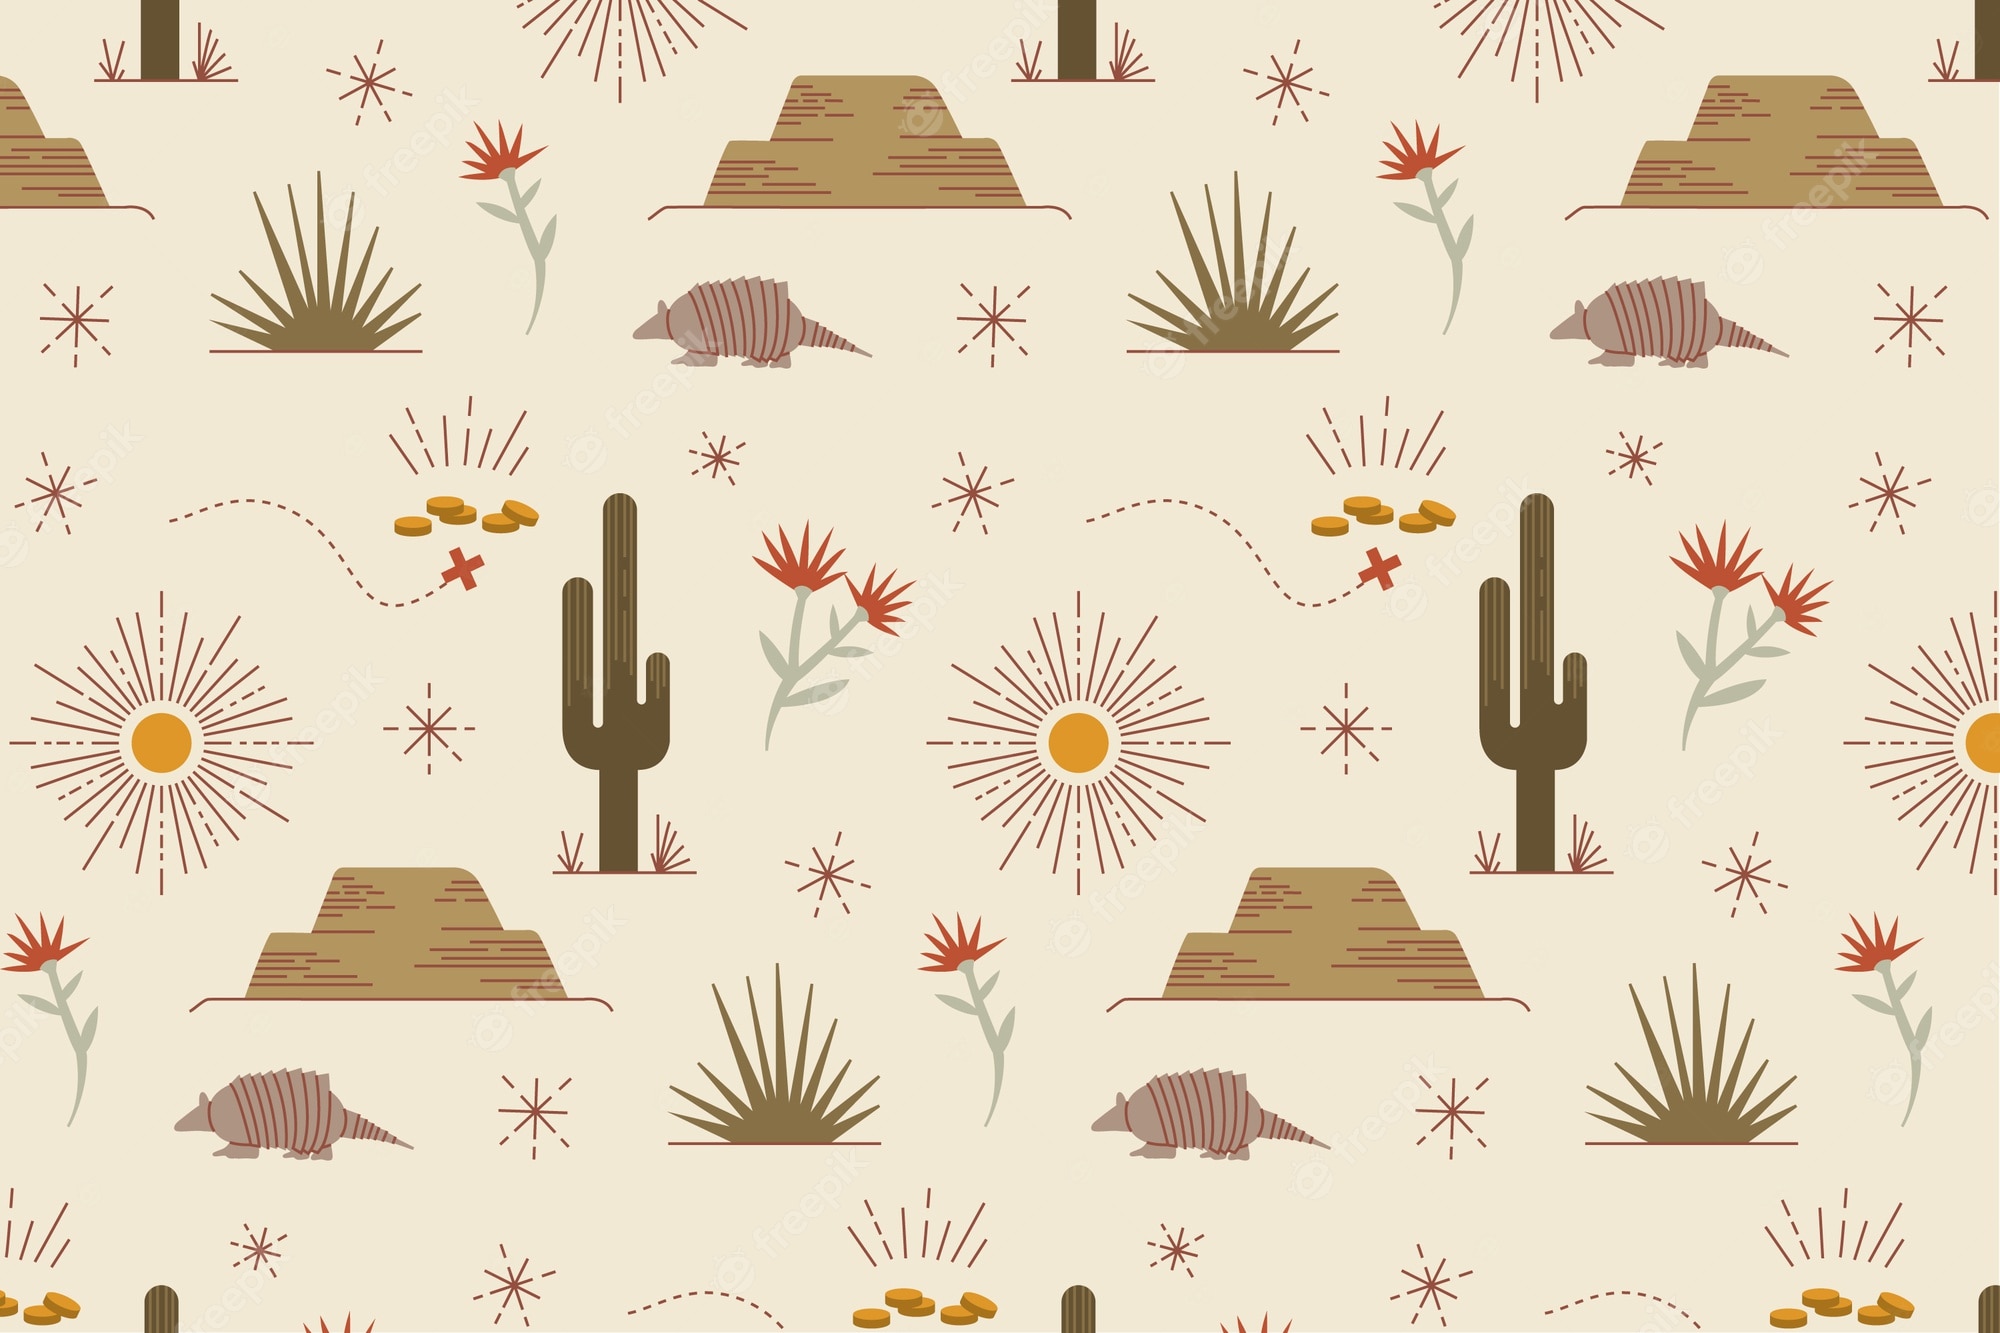 Western Vectors & Illustrations for Free Download